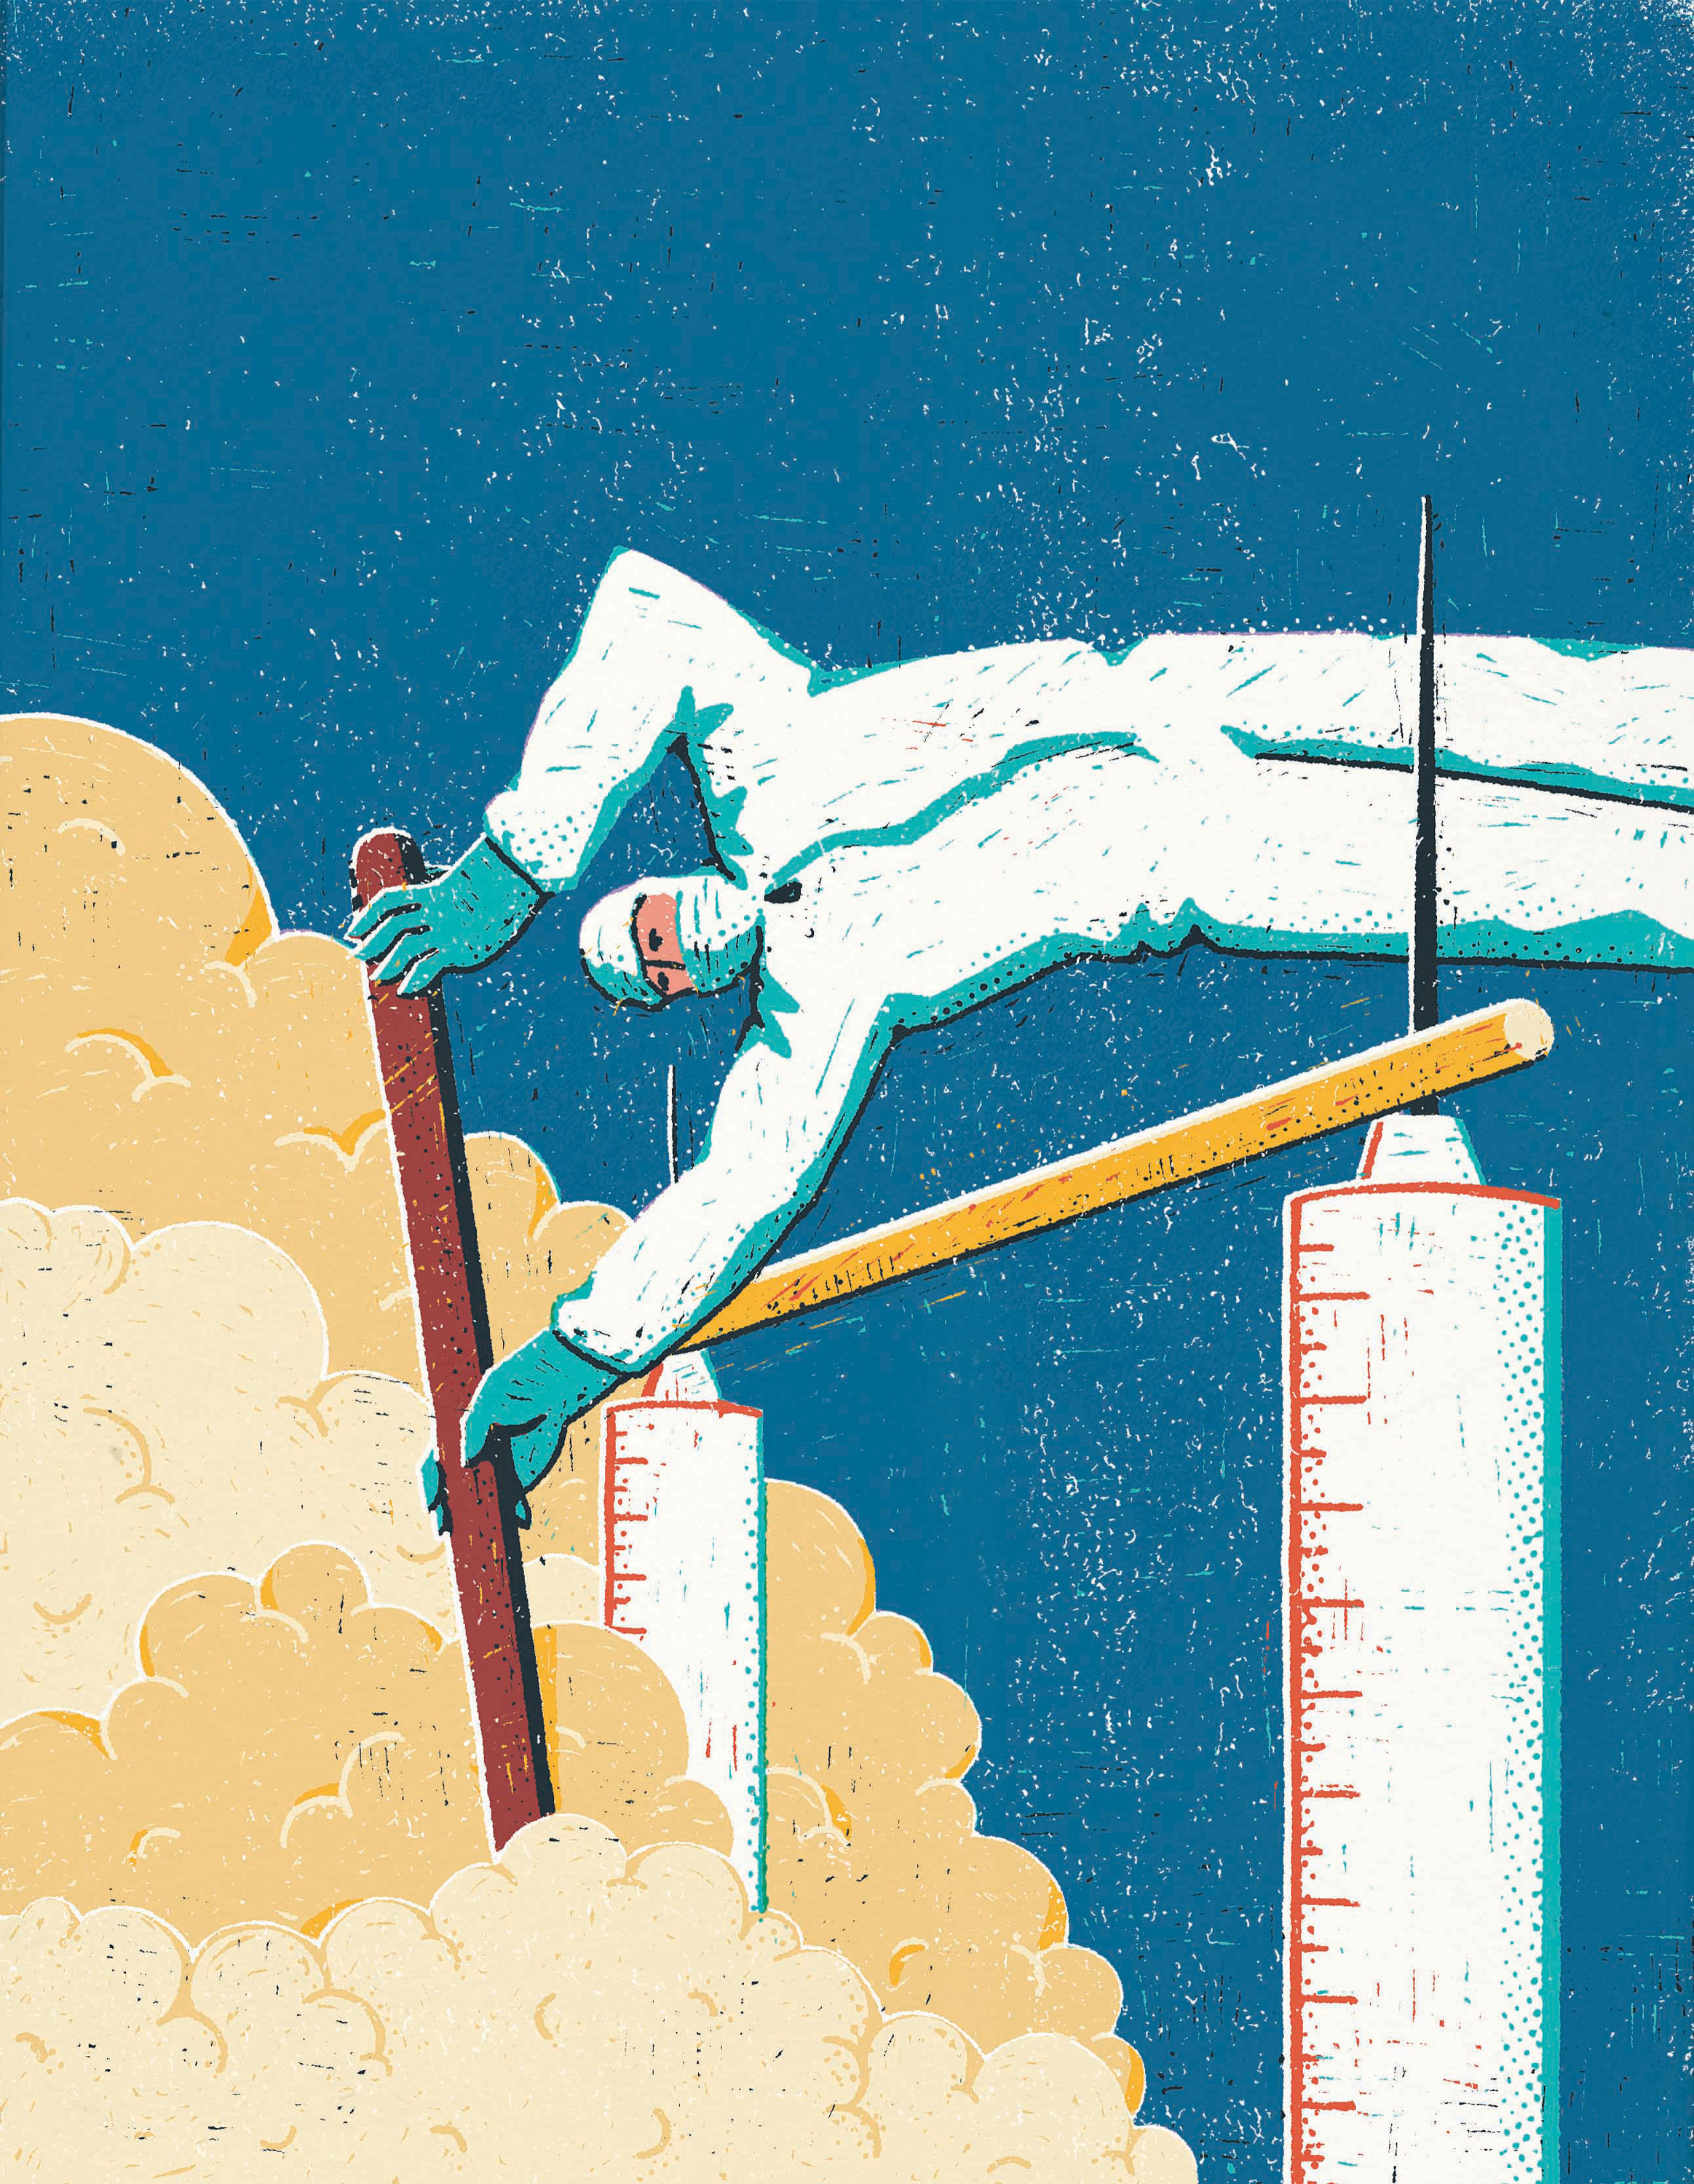 llustration of a pharmaceutical scientist jumping a pole vault made out of syringe